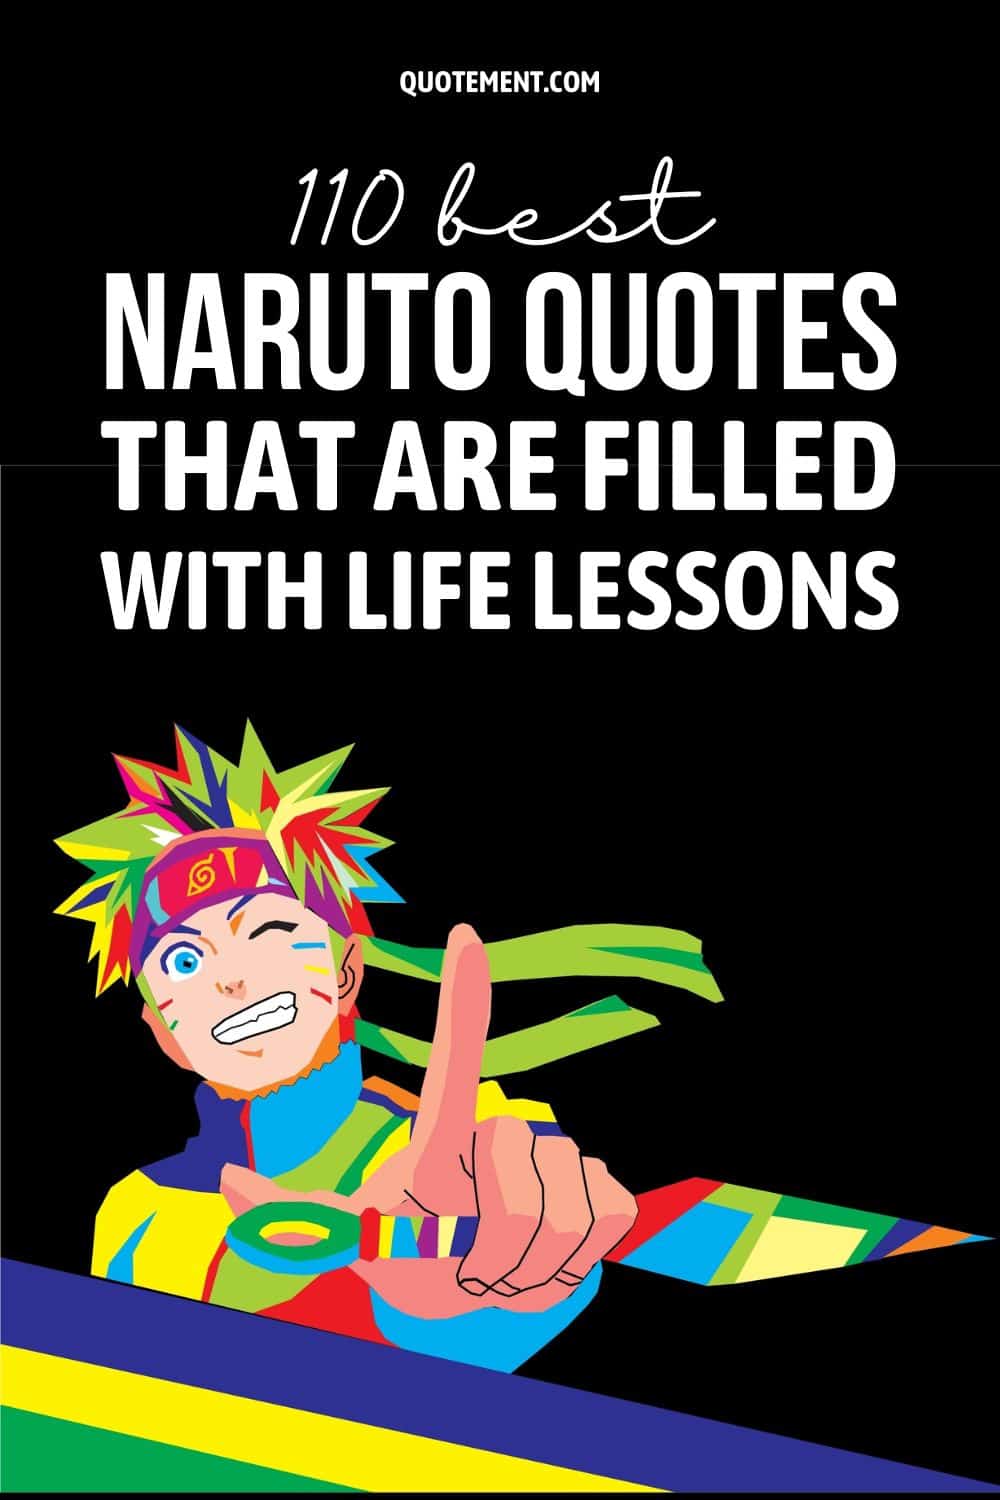 110 Best Naruto Quotes That Are Filled With Life Lessons
